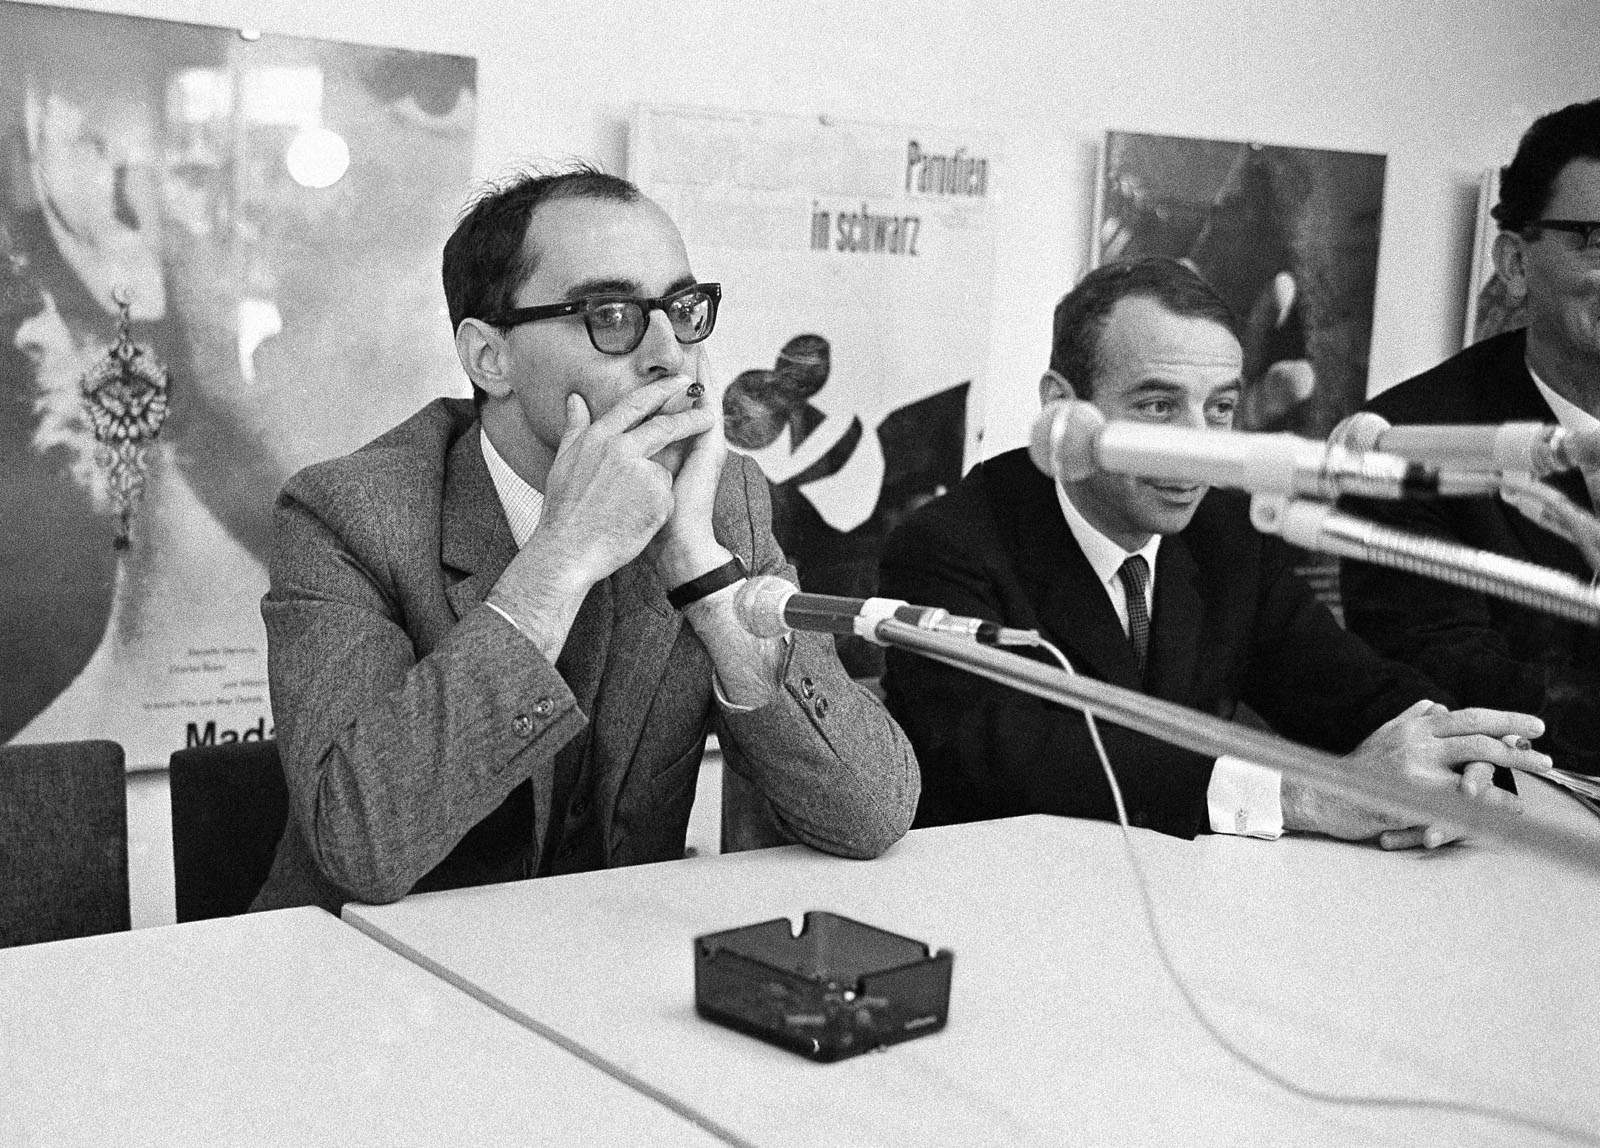 French director Jean-Luc Godard's "Masculin, feminin" is being tipped in the 16th annual Berlin Film Festival as an insider for the top movie prize, the Berlin Golden Bear. Here, Godard is seen during a press conference in Berlin, June 27, 1966. (AP Photo/Edwin Reichert)